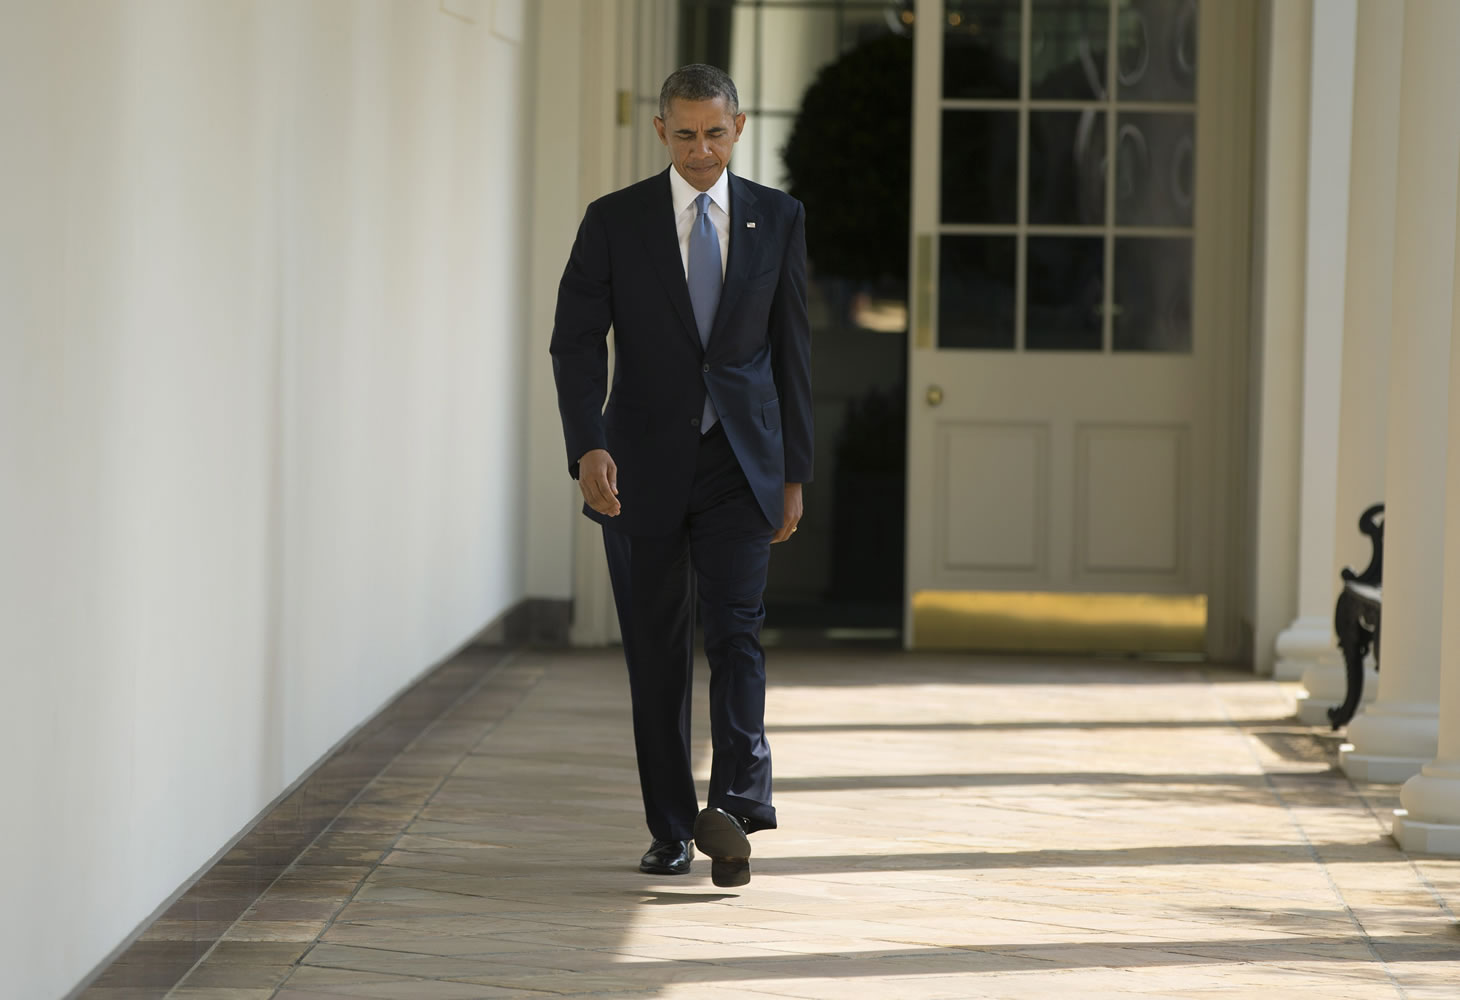 President Barack Obama walks along the West Wing Colonnade towards the Oval Office of the White House in Washington on Tuesday ahead of his daily briefing.